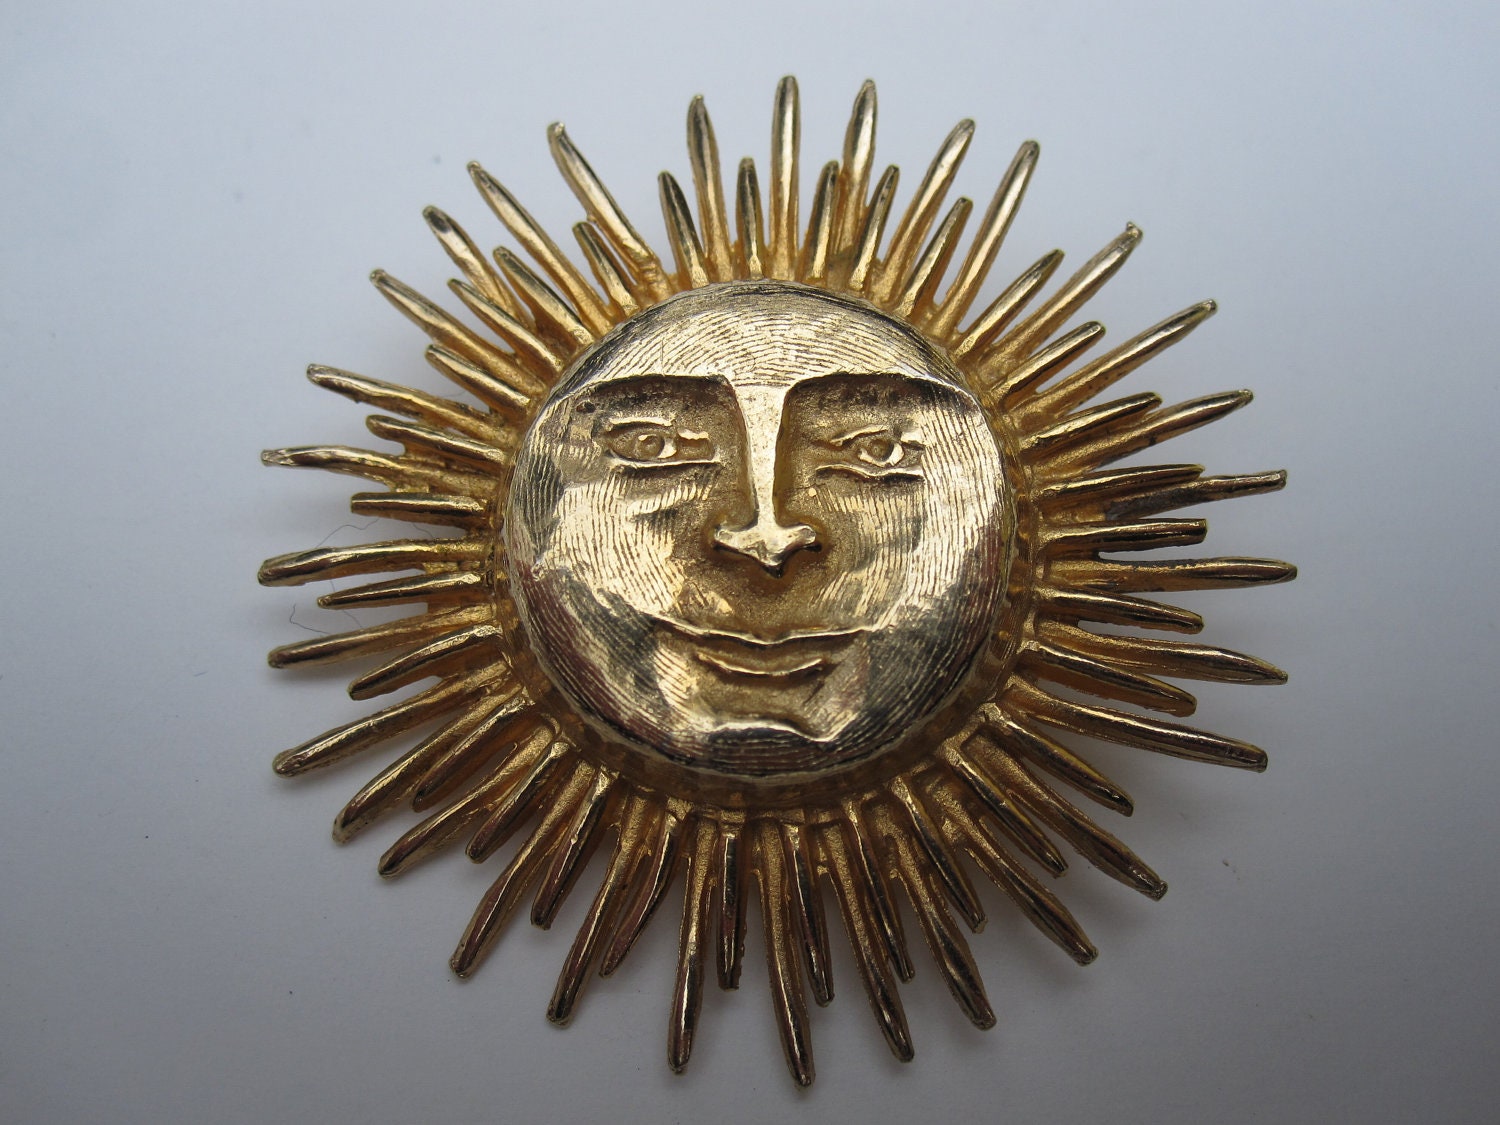 Vintage ACCESSOCRAFT N.Y.C. Gold Tone Sun with Face Pin/Brooch - JennysVintageView